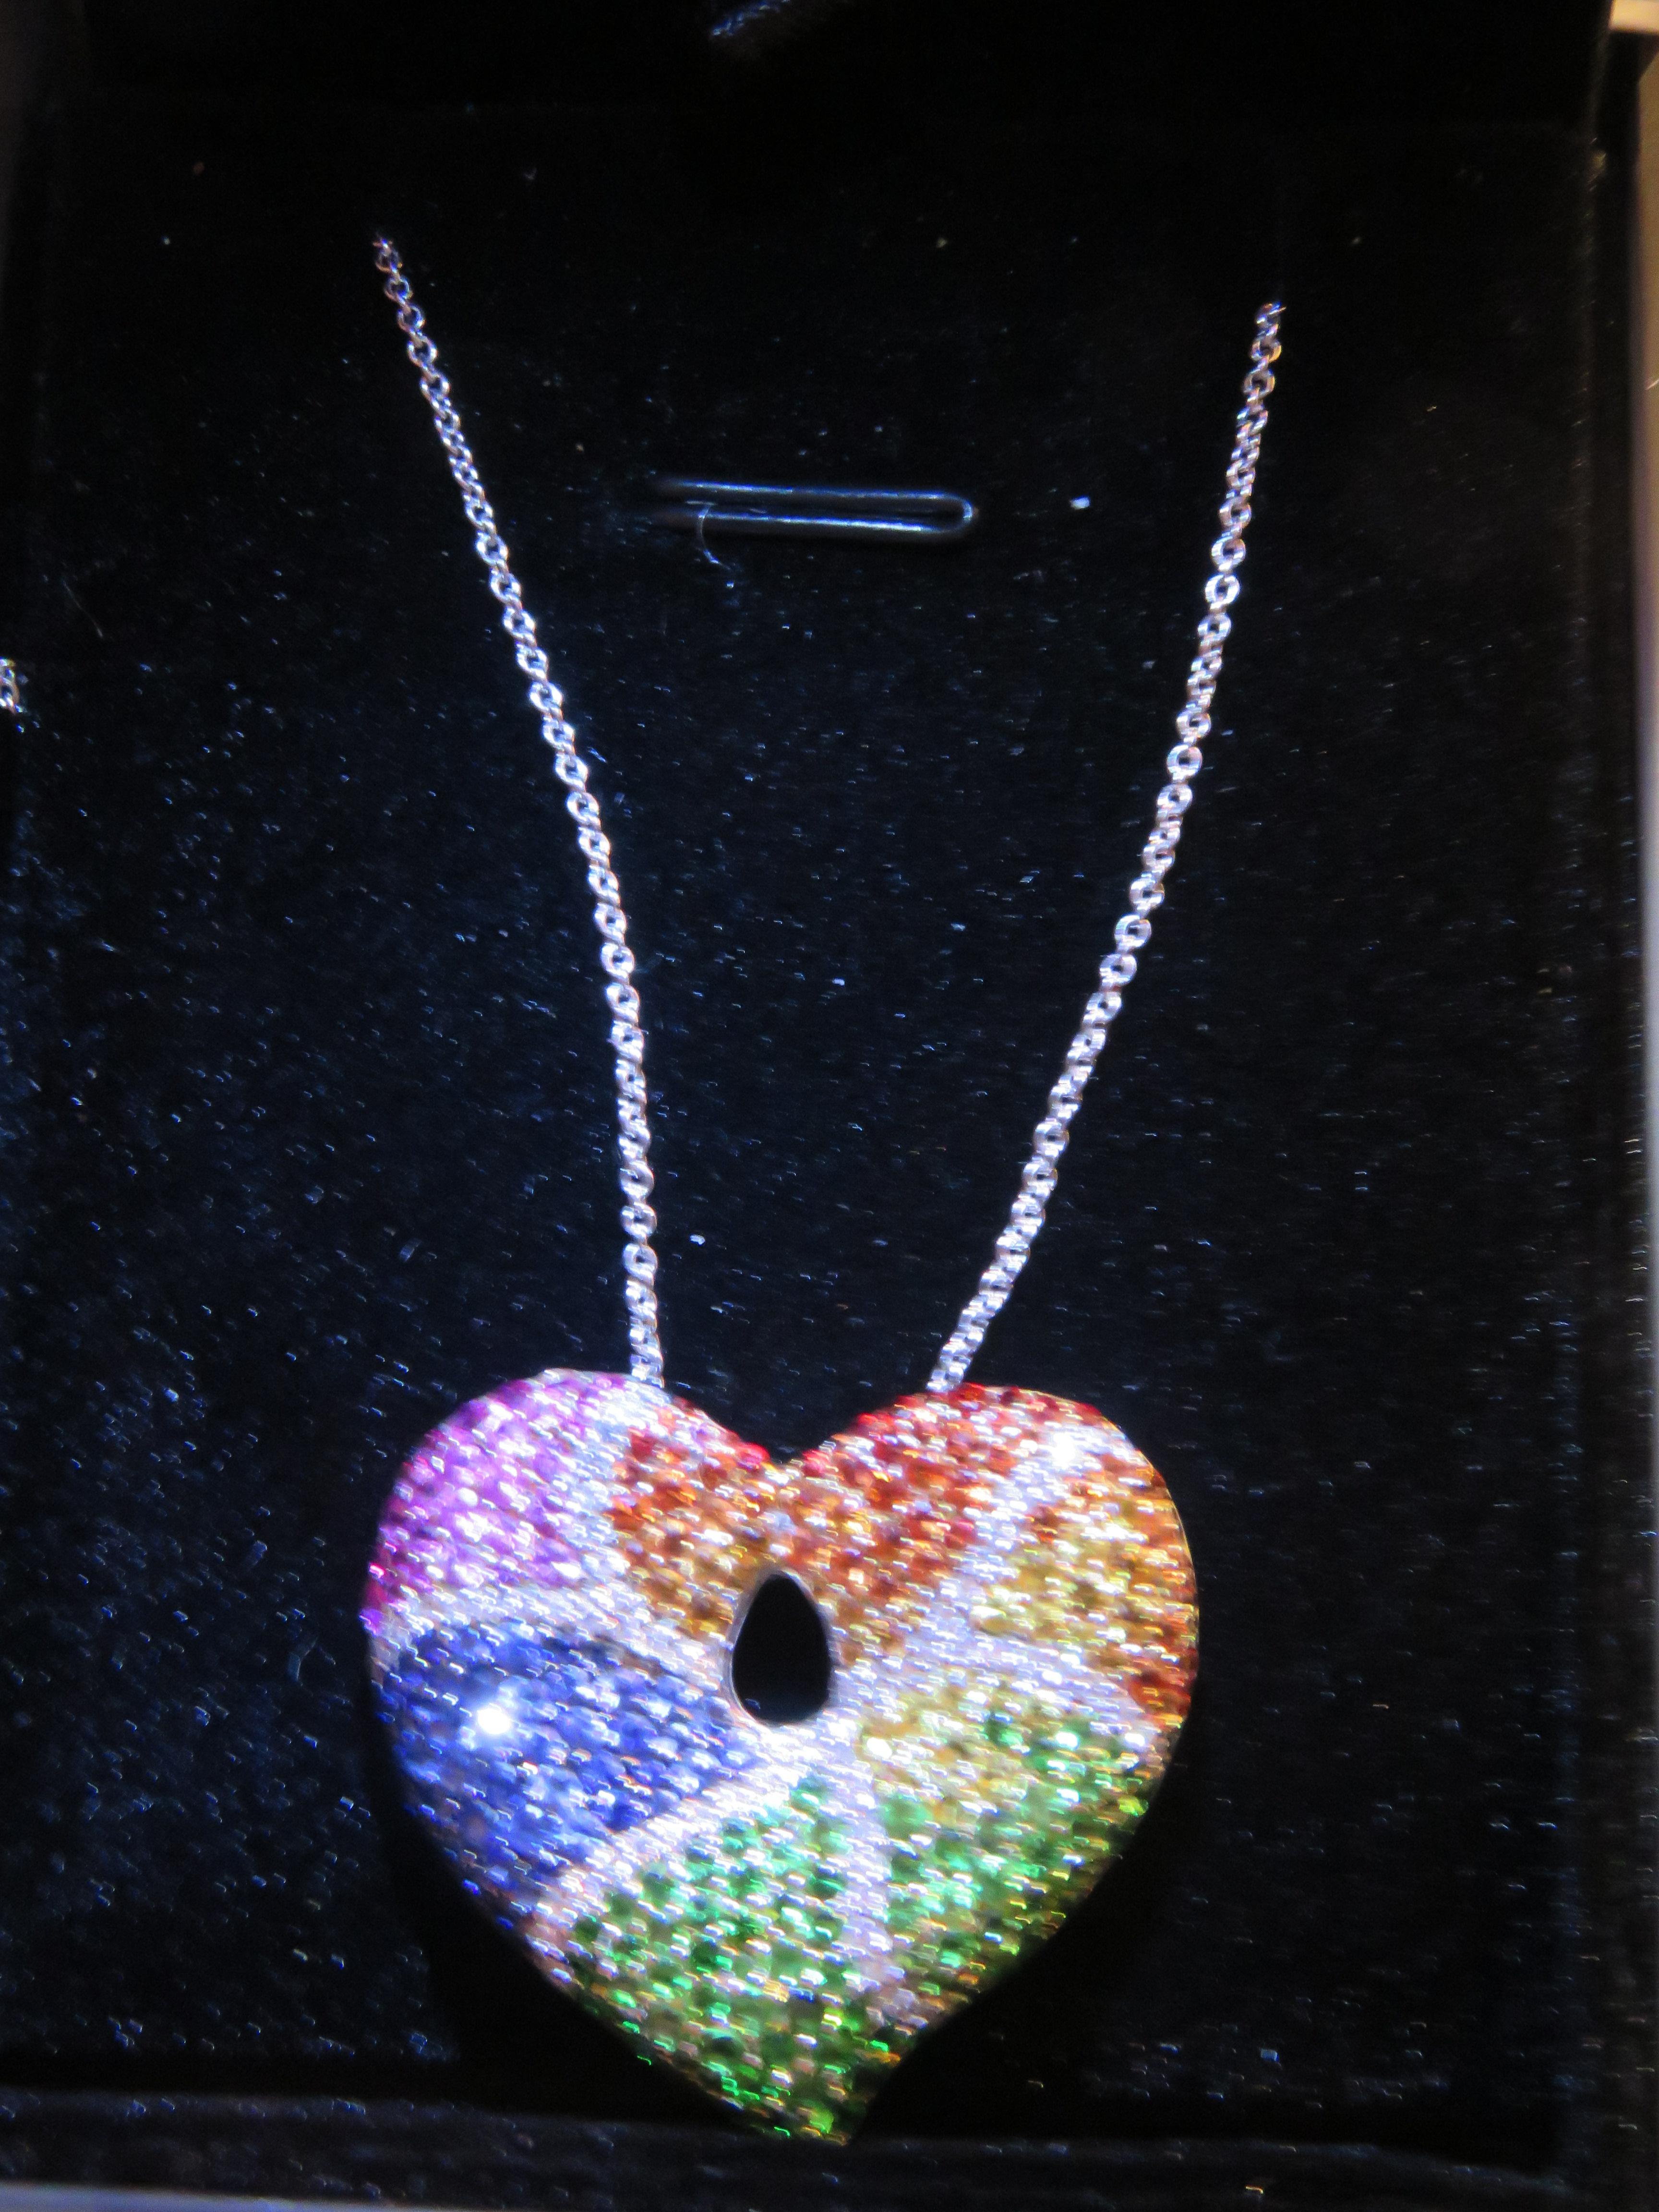 The Following Item we are offering is this Beautiful Rare Important 18KT White Gold Black Diamond, Ruby, Pink, Orange, Yellow, Blue Sapphire and Green Tsavorite Heart Pendant Necklace. Necklace is comprised of over 4 Carats of Fine Invisibly Set